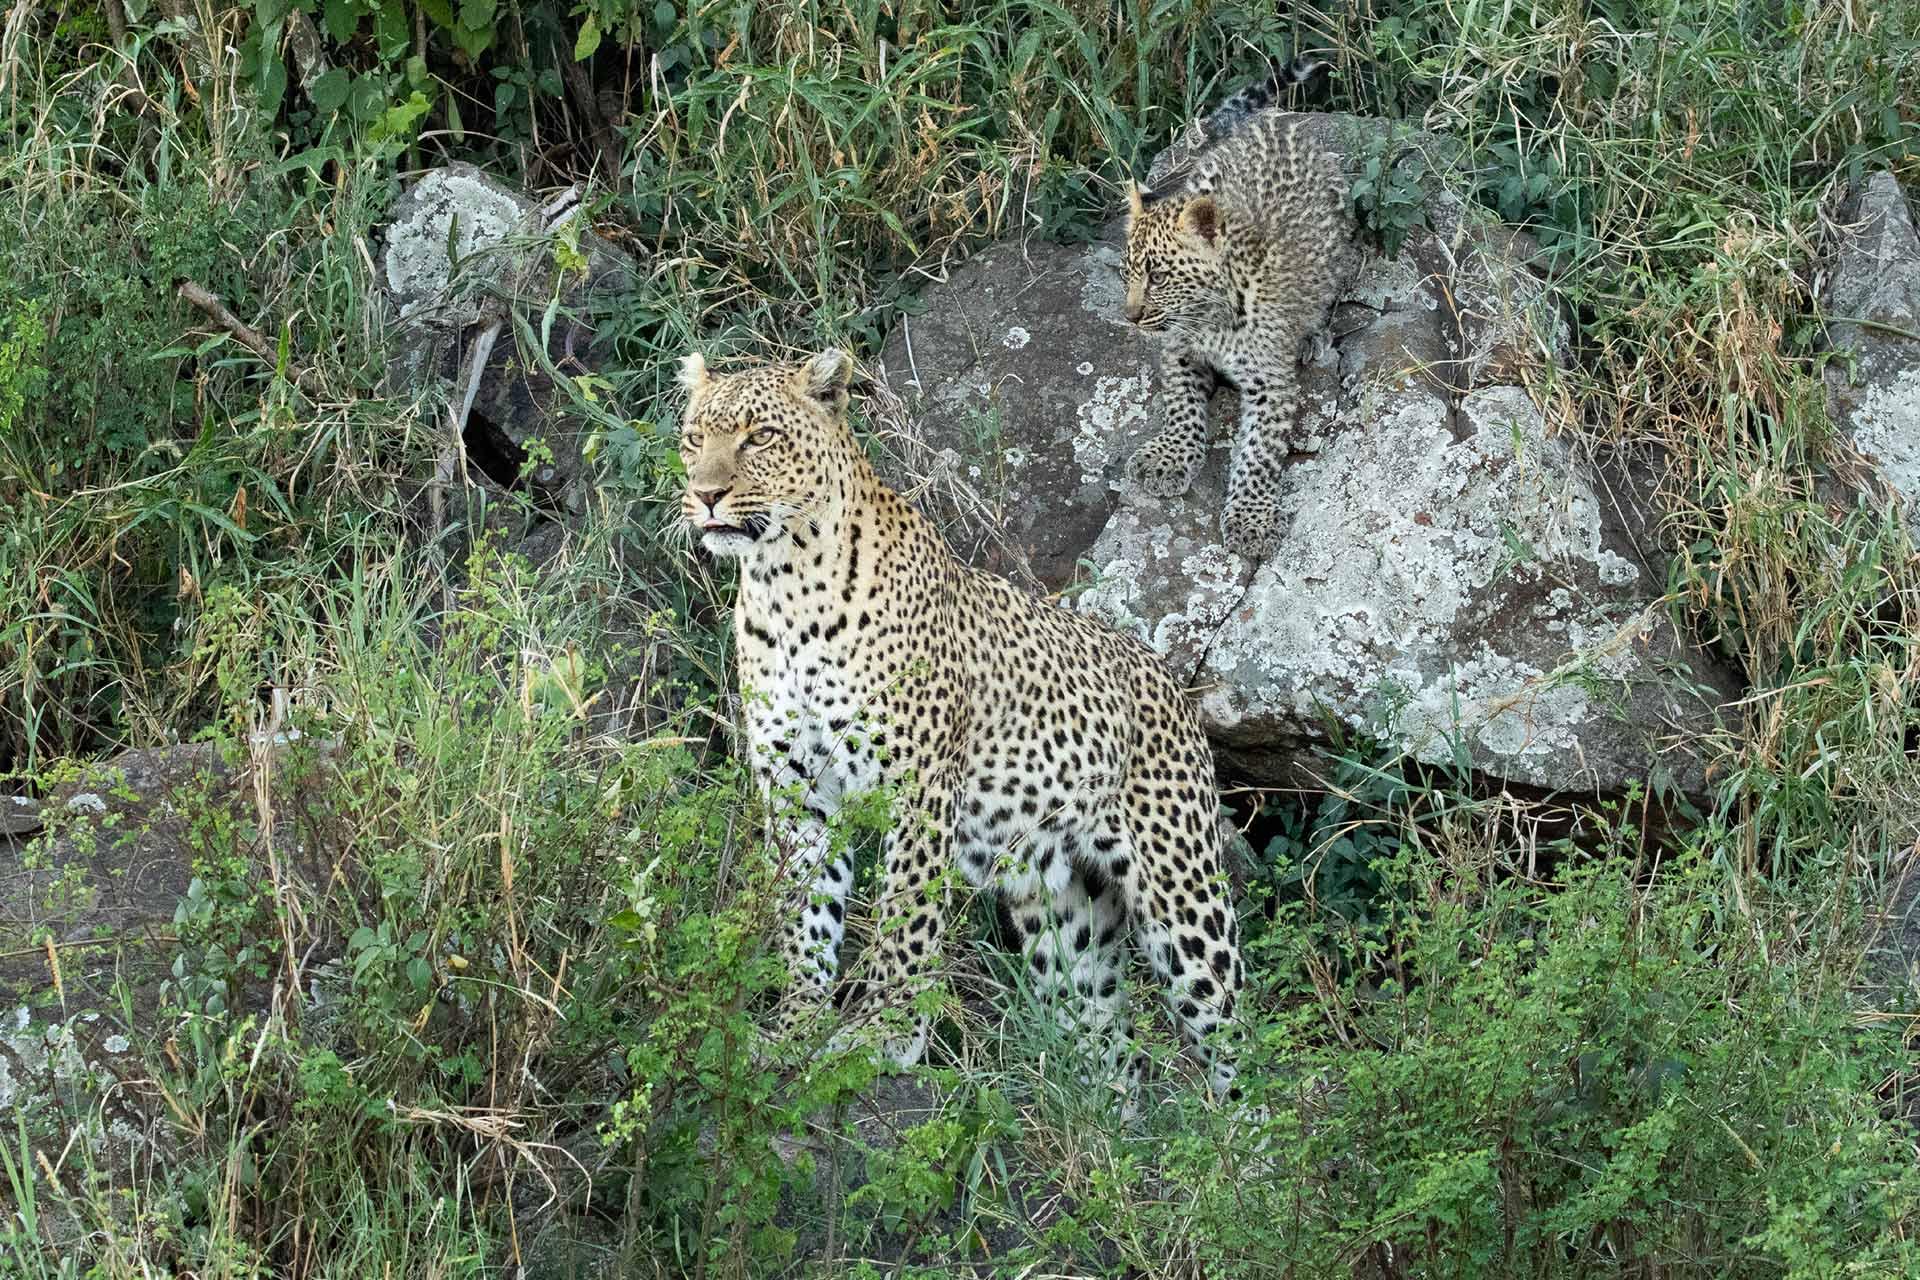 It is listed as Vulnerable on the IUCN Red List because leopard populations are threatened by habitat loss and fragmentation, and are declining in large parts of the global rangen